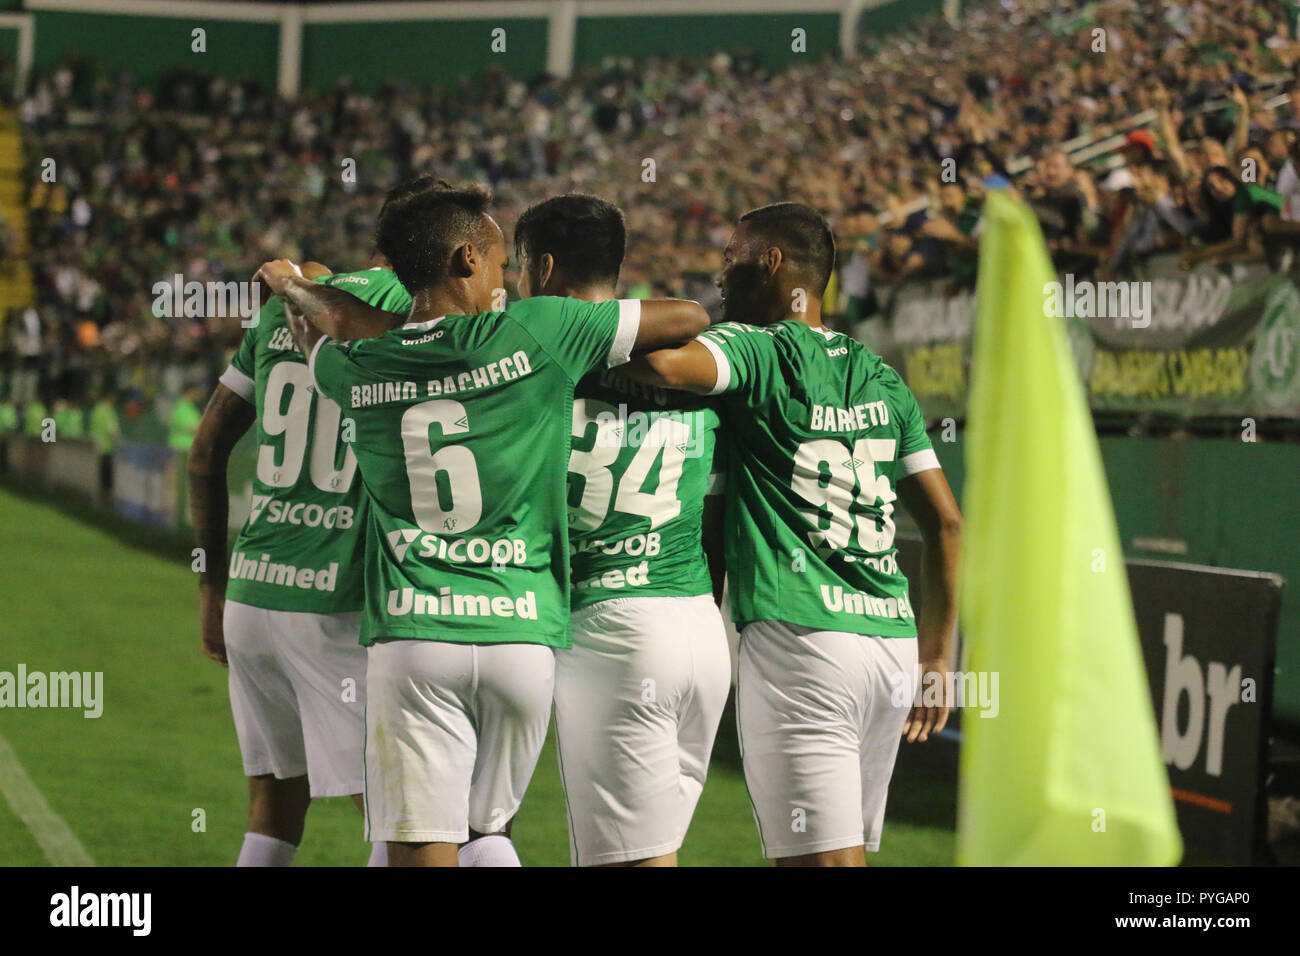 SC Chapecoense celebrates its goal in which it was marked touch in the moe, in the valeu during match against the America-MG in the arena Arena Conda by the Chapecoense - 27/10/2018 - Brazilian A 2018, Chapecoense x Am rica-MG - player Doffo Brazilian championship A 2018. Photo: Renato Padilha / AGIF Stock Photo